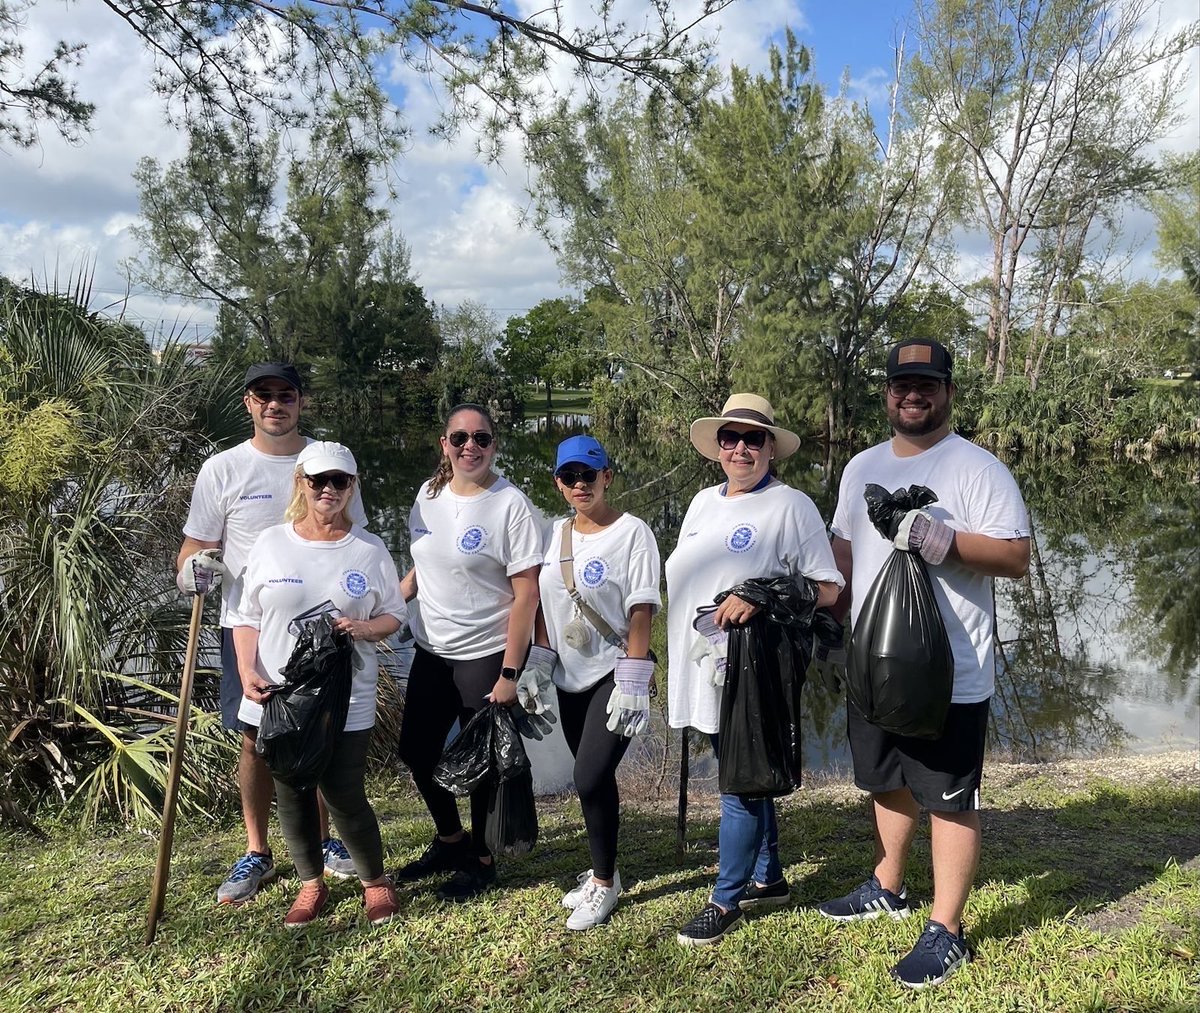 Excited to kick off the 41st year of #Baynanza at @FIU's Biscayne Bay Campus! Let's protect our environment and keep our Biscayne Bay clean!

Shout-out to #TeamCabrera and our volunteers for cleaning up A.D Barnes Park!